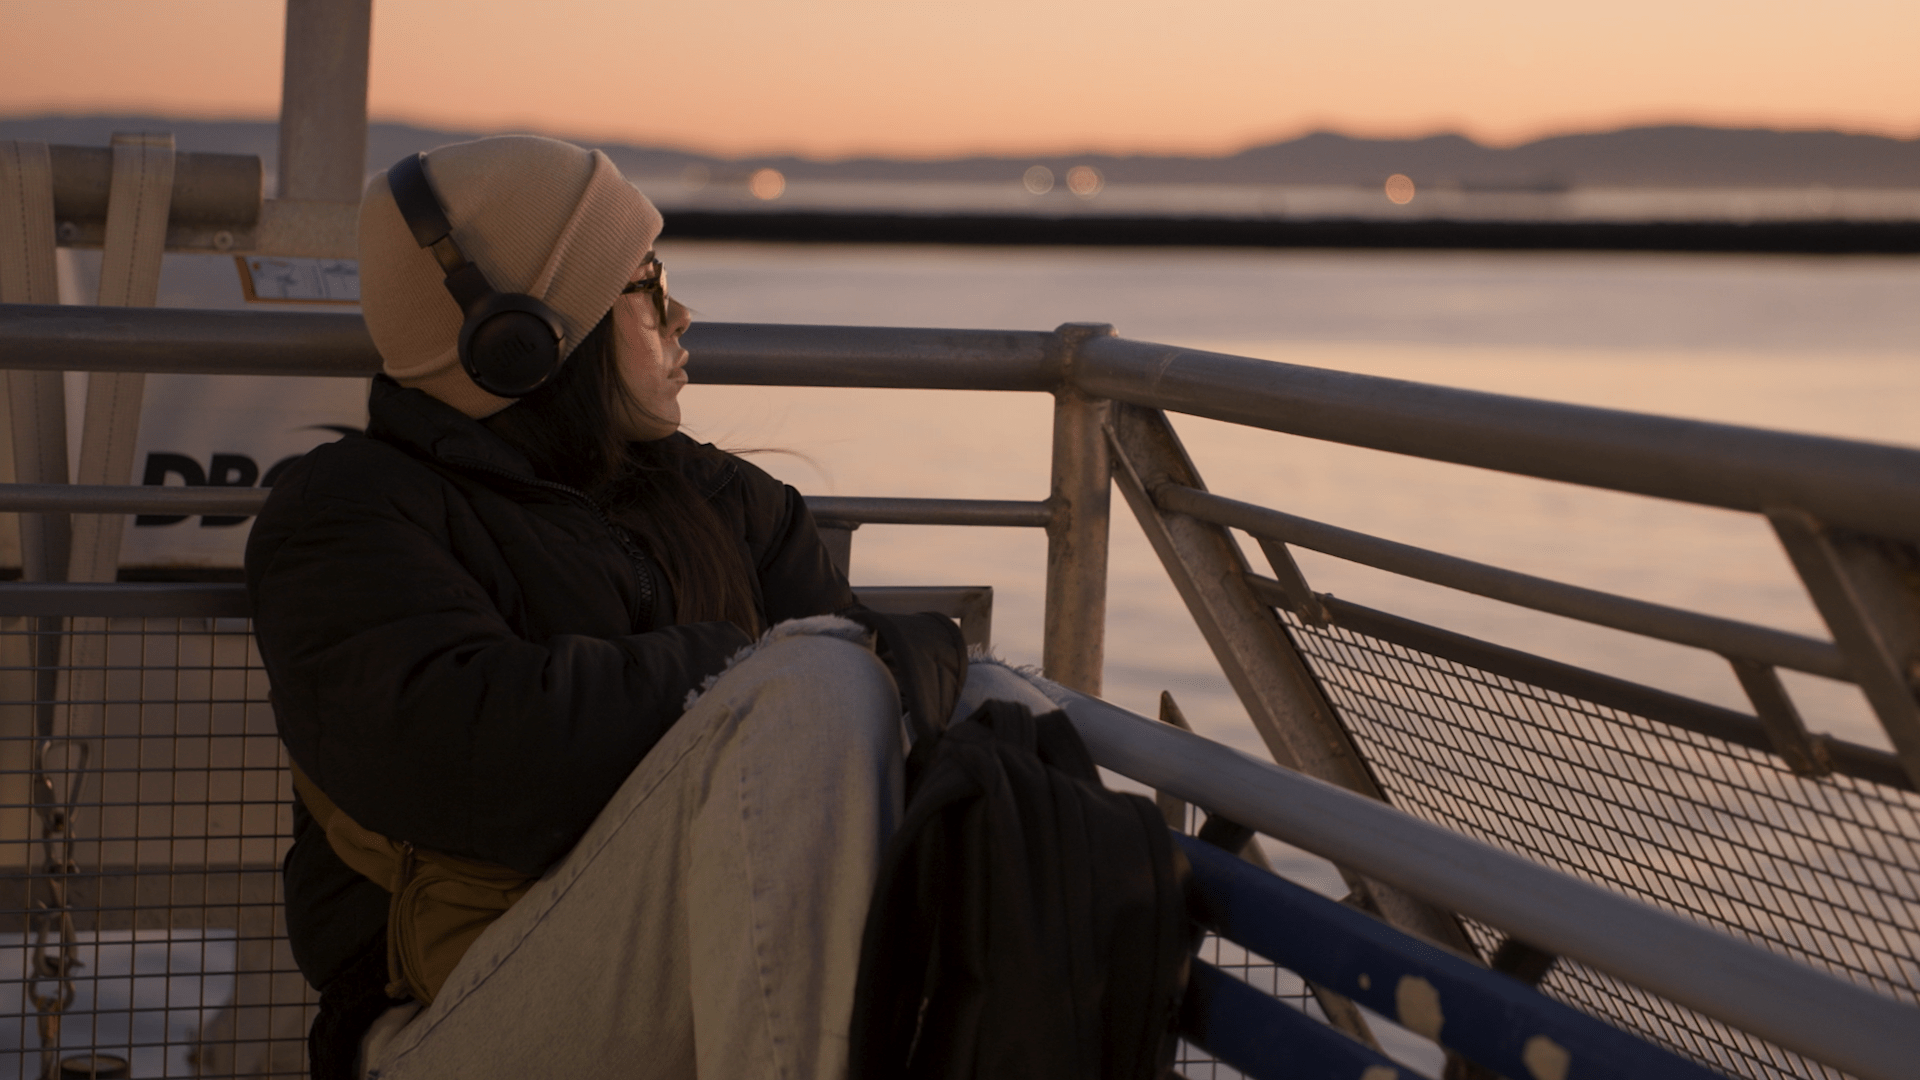 Watch: A Ride on the San Francisco Ferry During Golden Hour